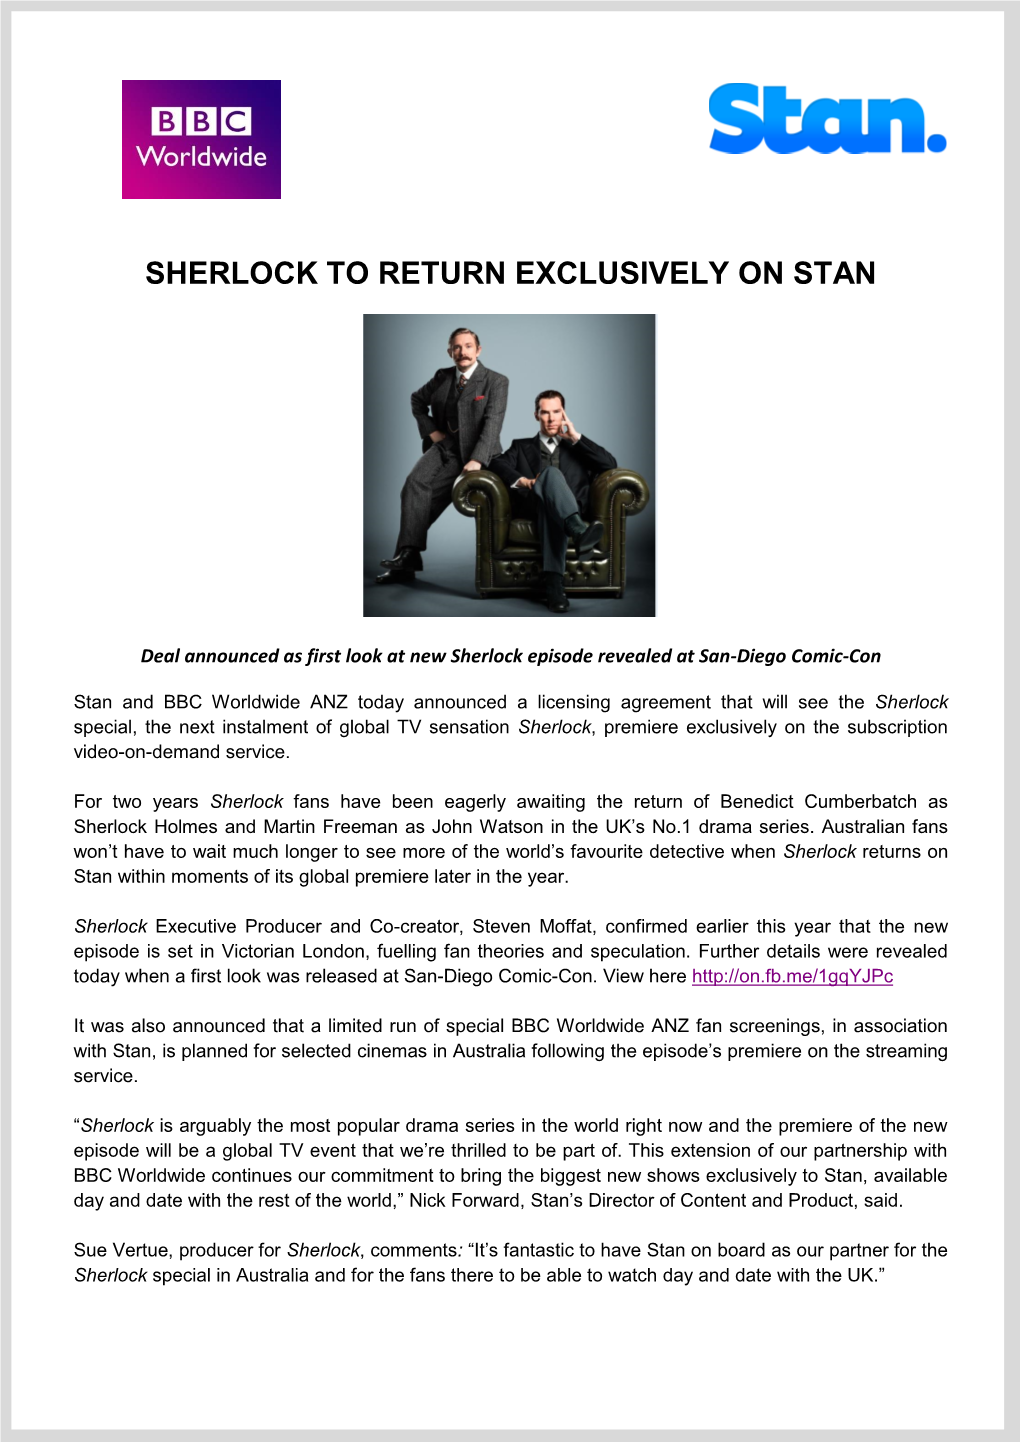 Sherlock to Return Exclusively on Stan